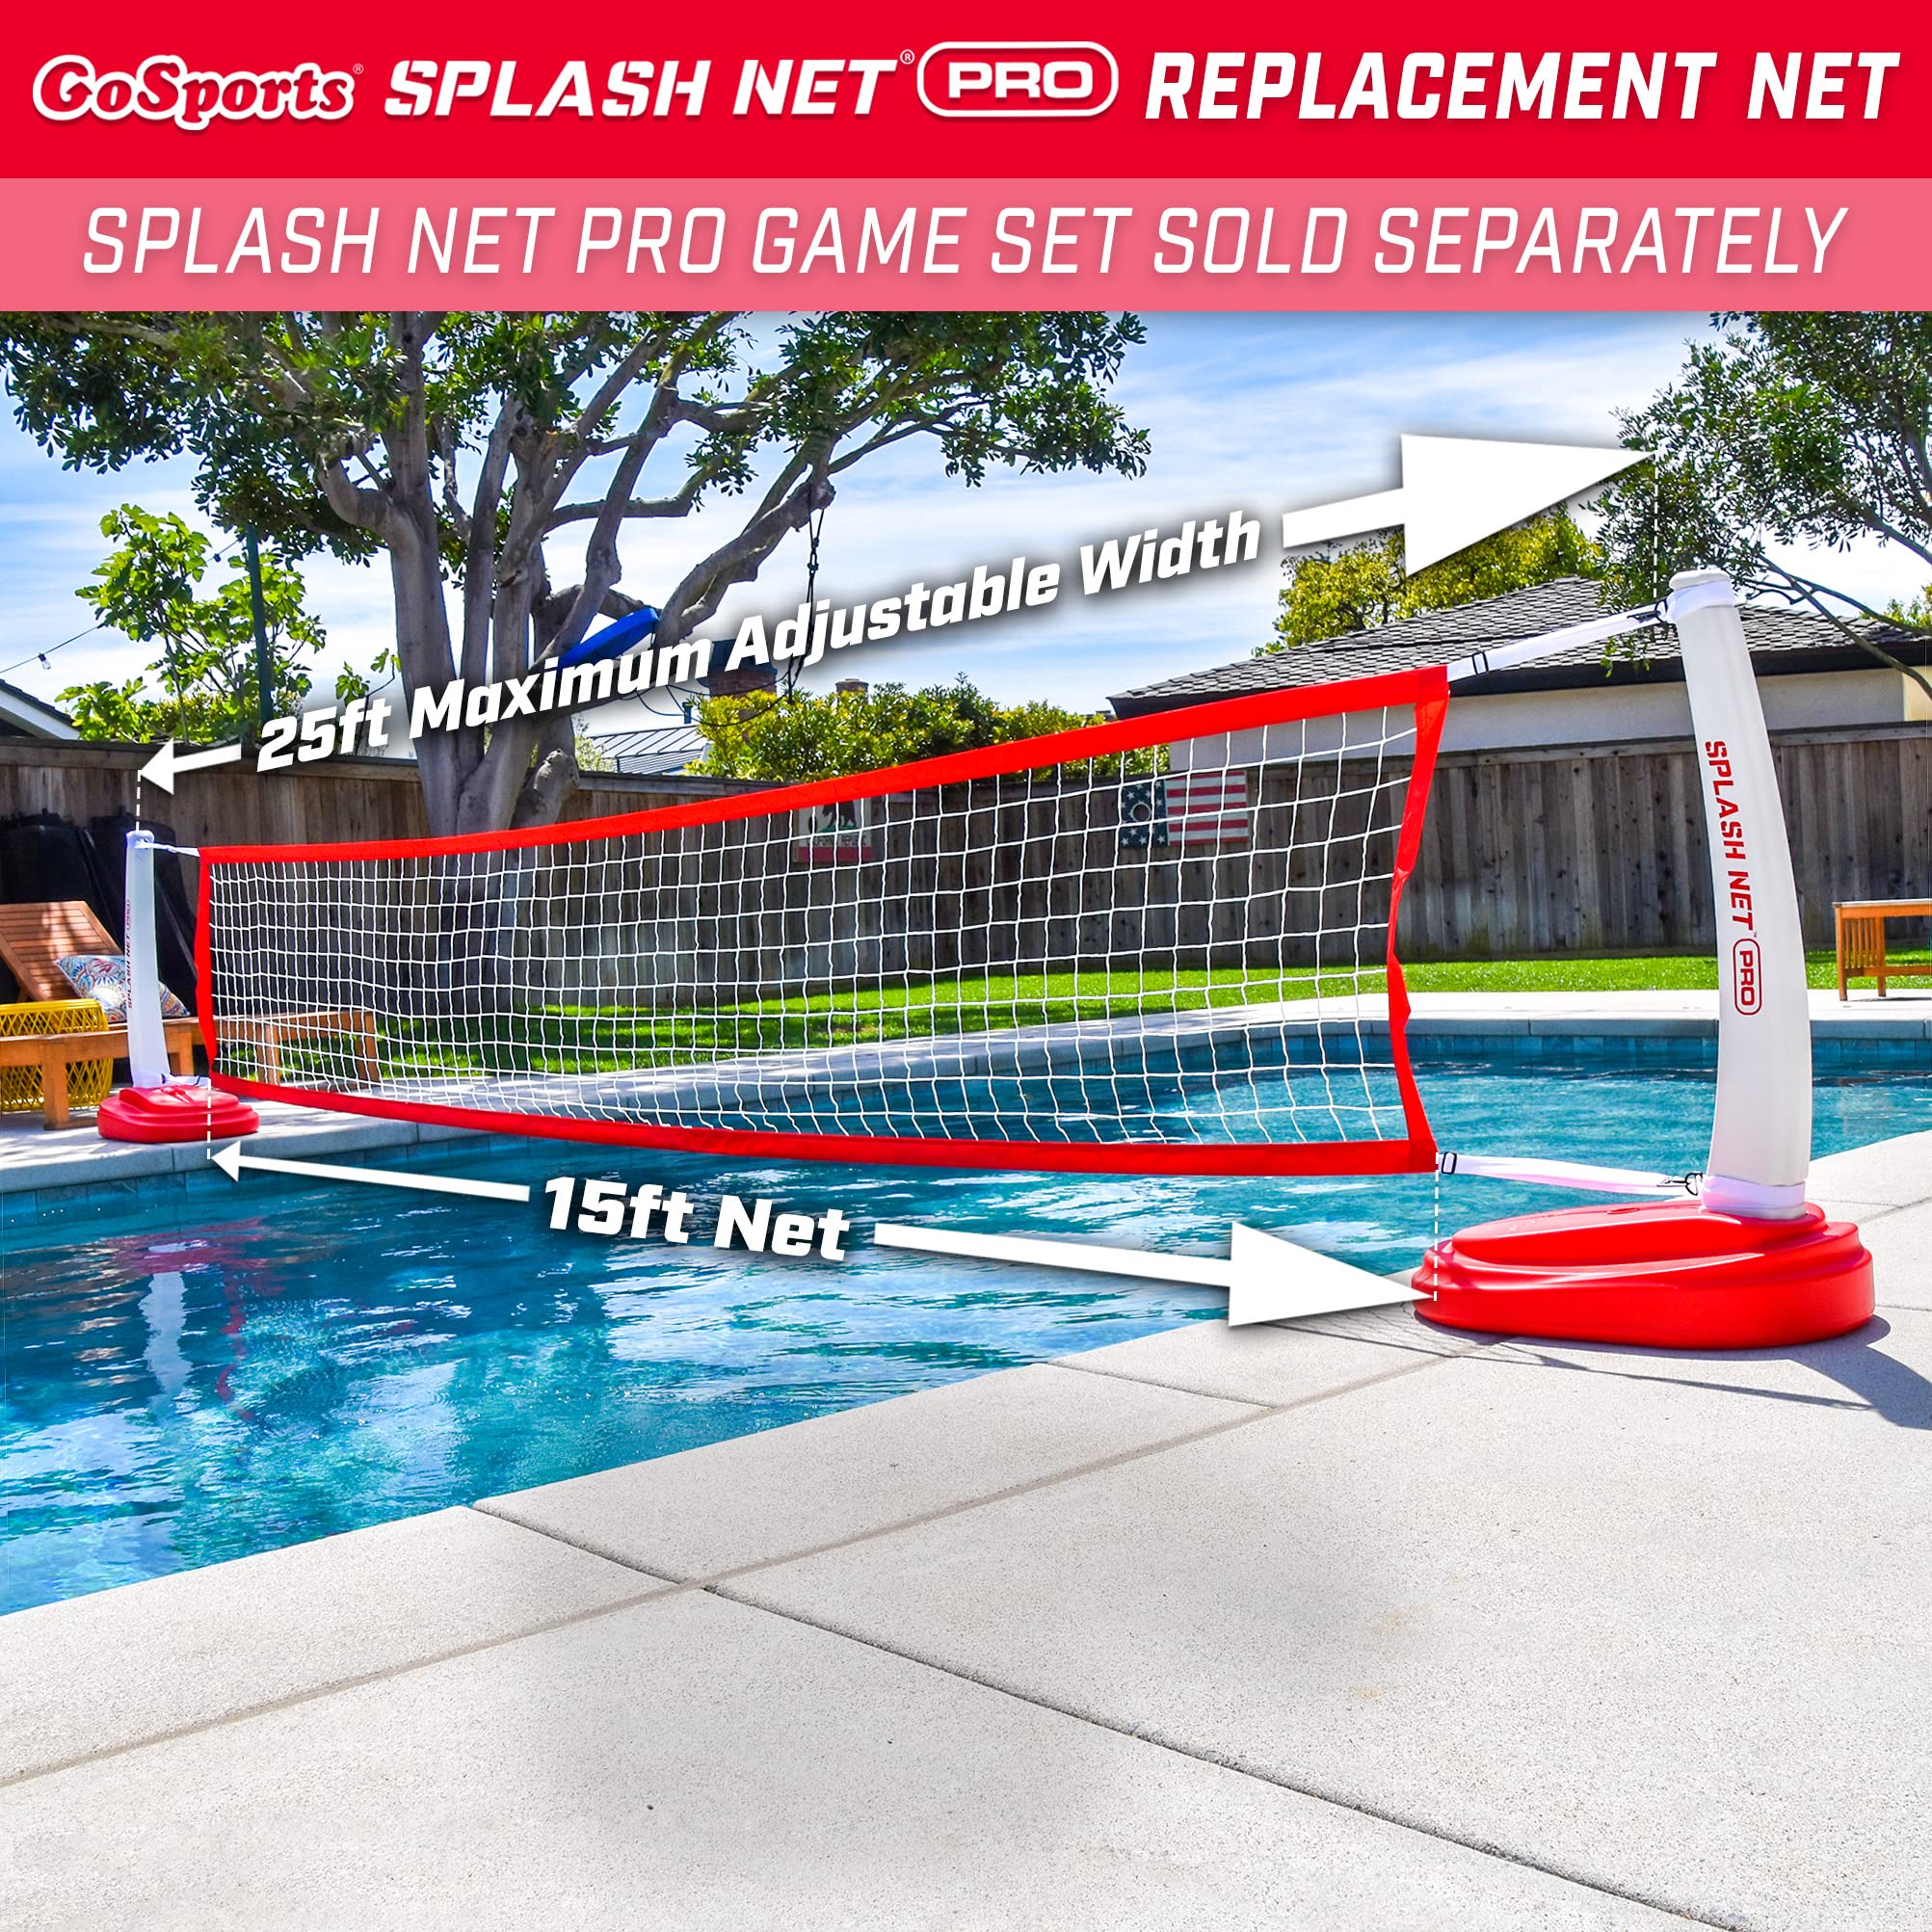 Replacement Pool Volleyball Net for GoSports Splash Net PRO or MAX Games